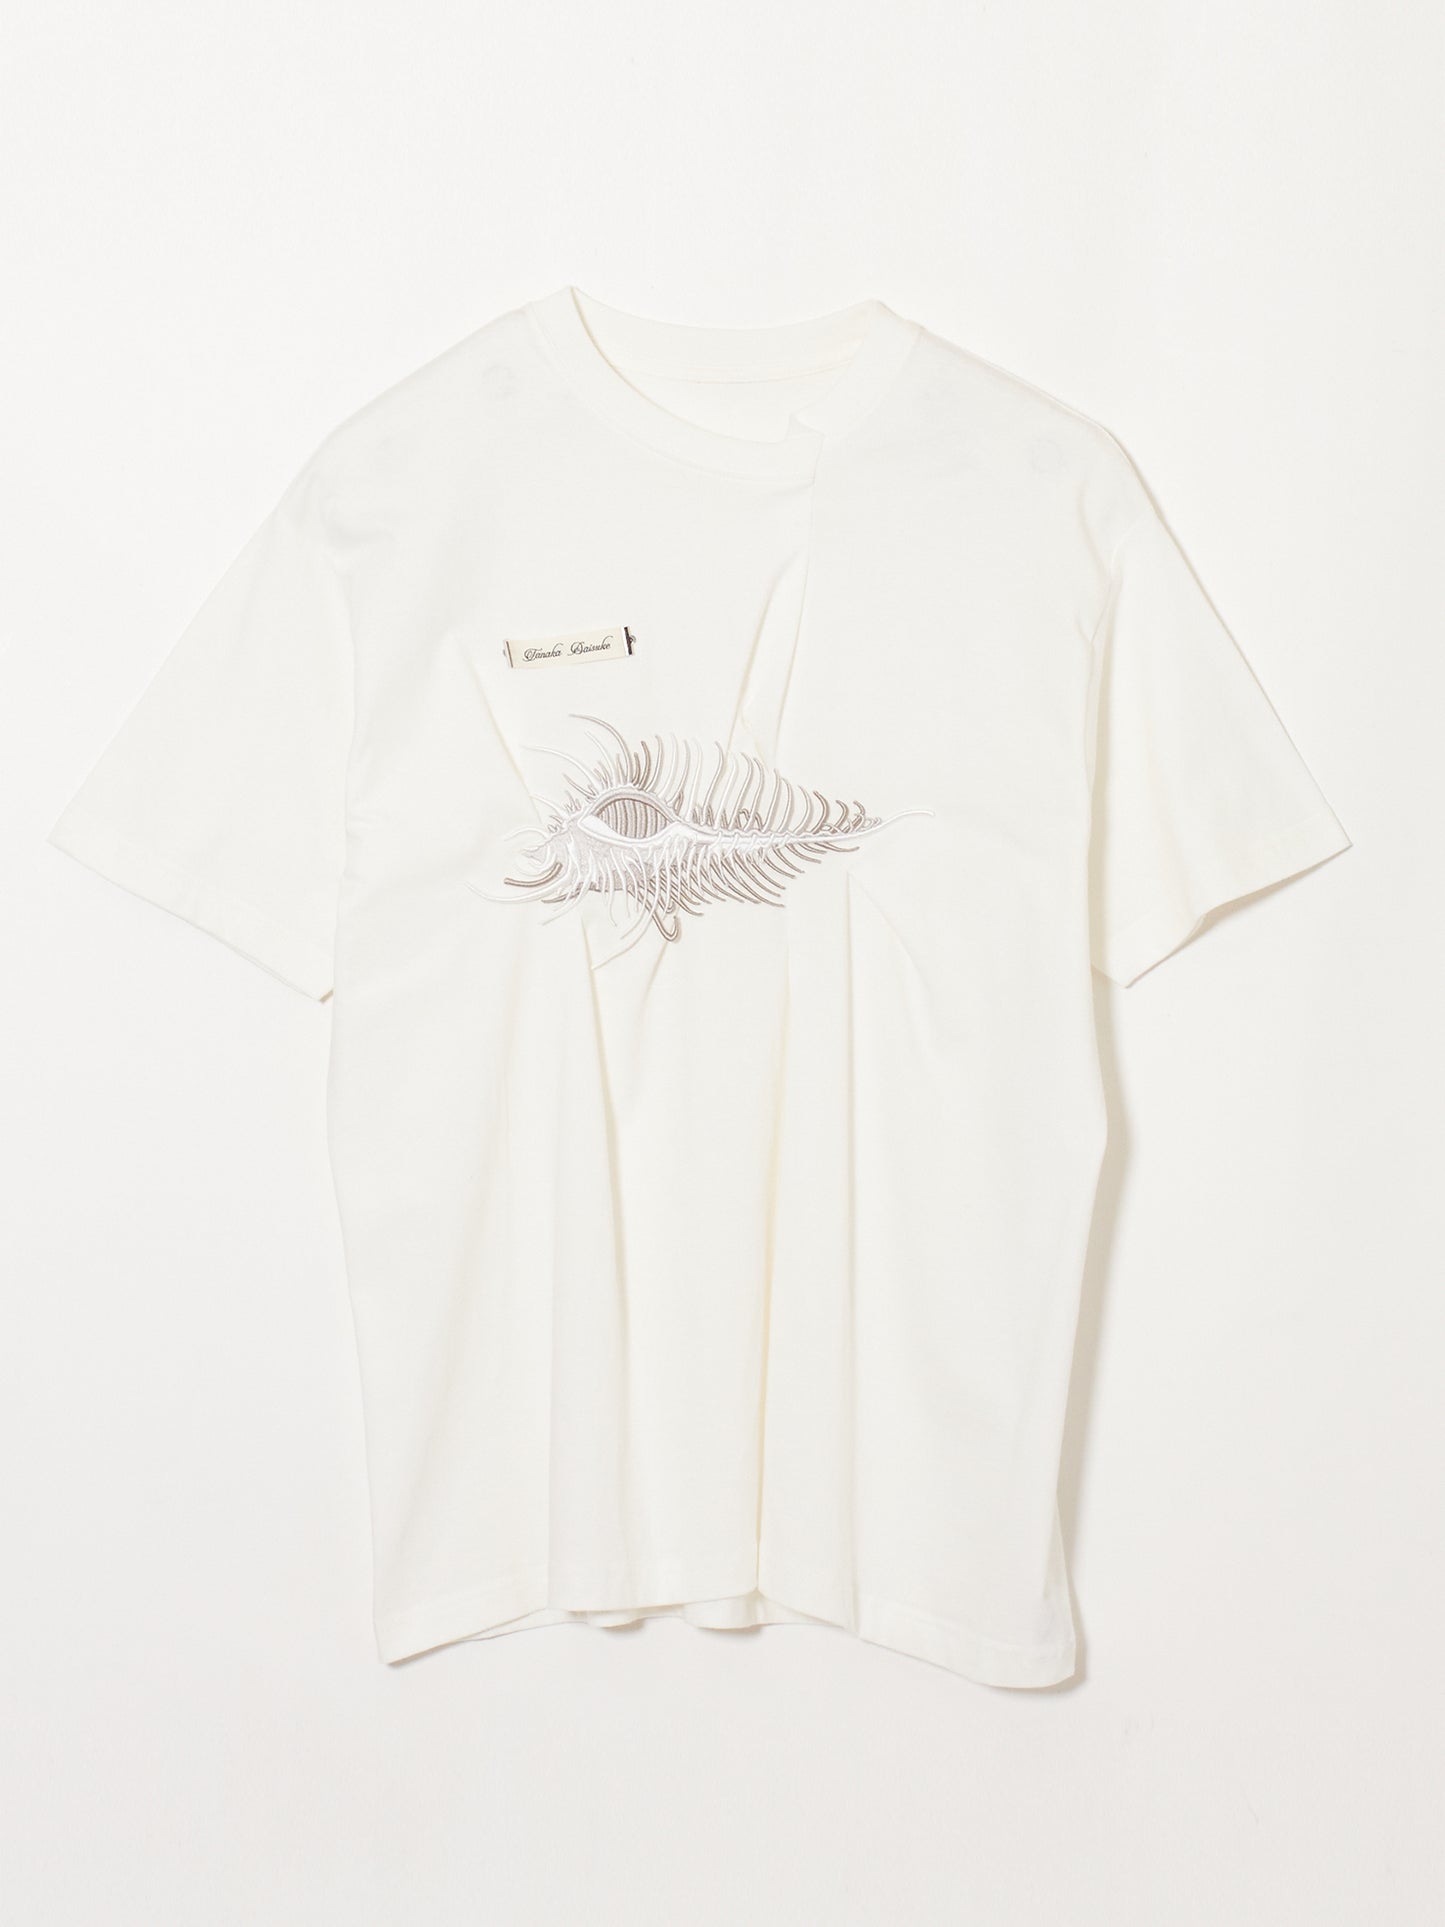 AKKIGAI on White T-shirt【Delivery in December 2023】